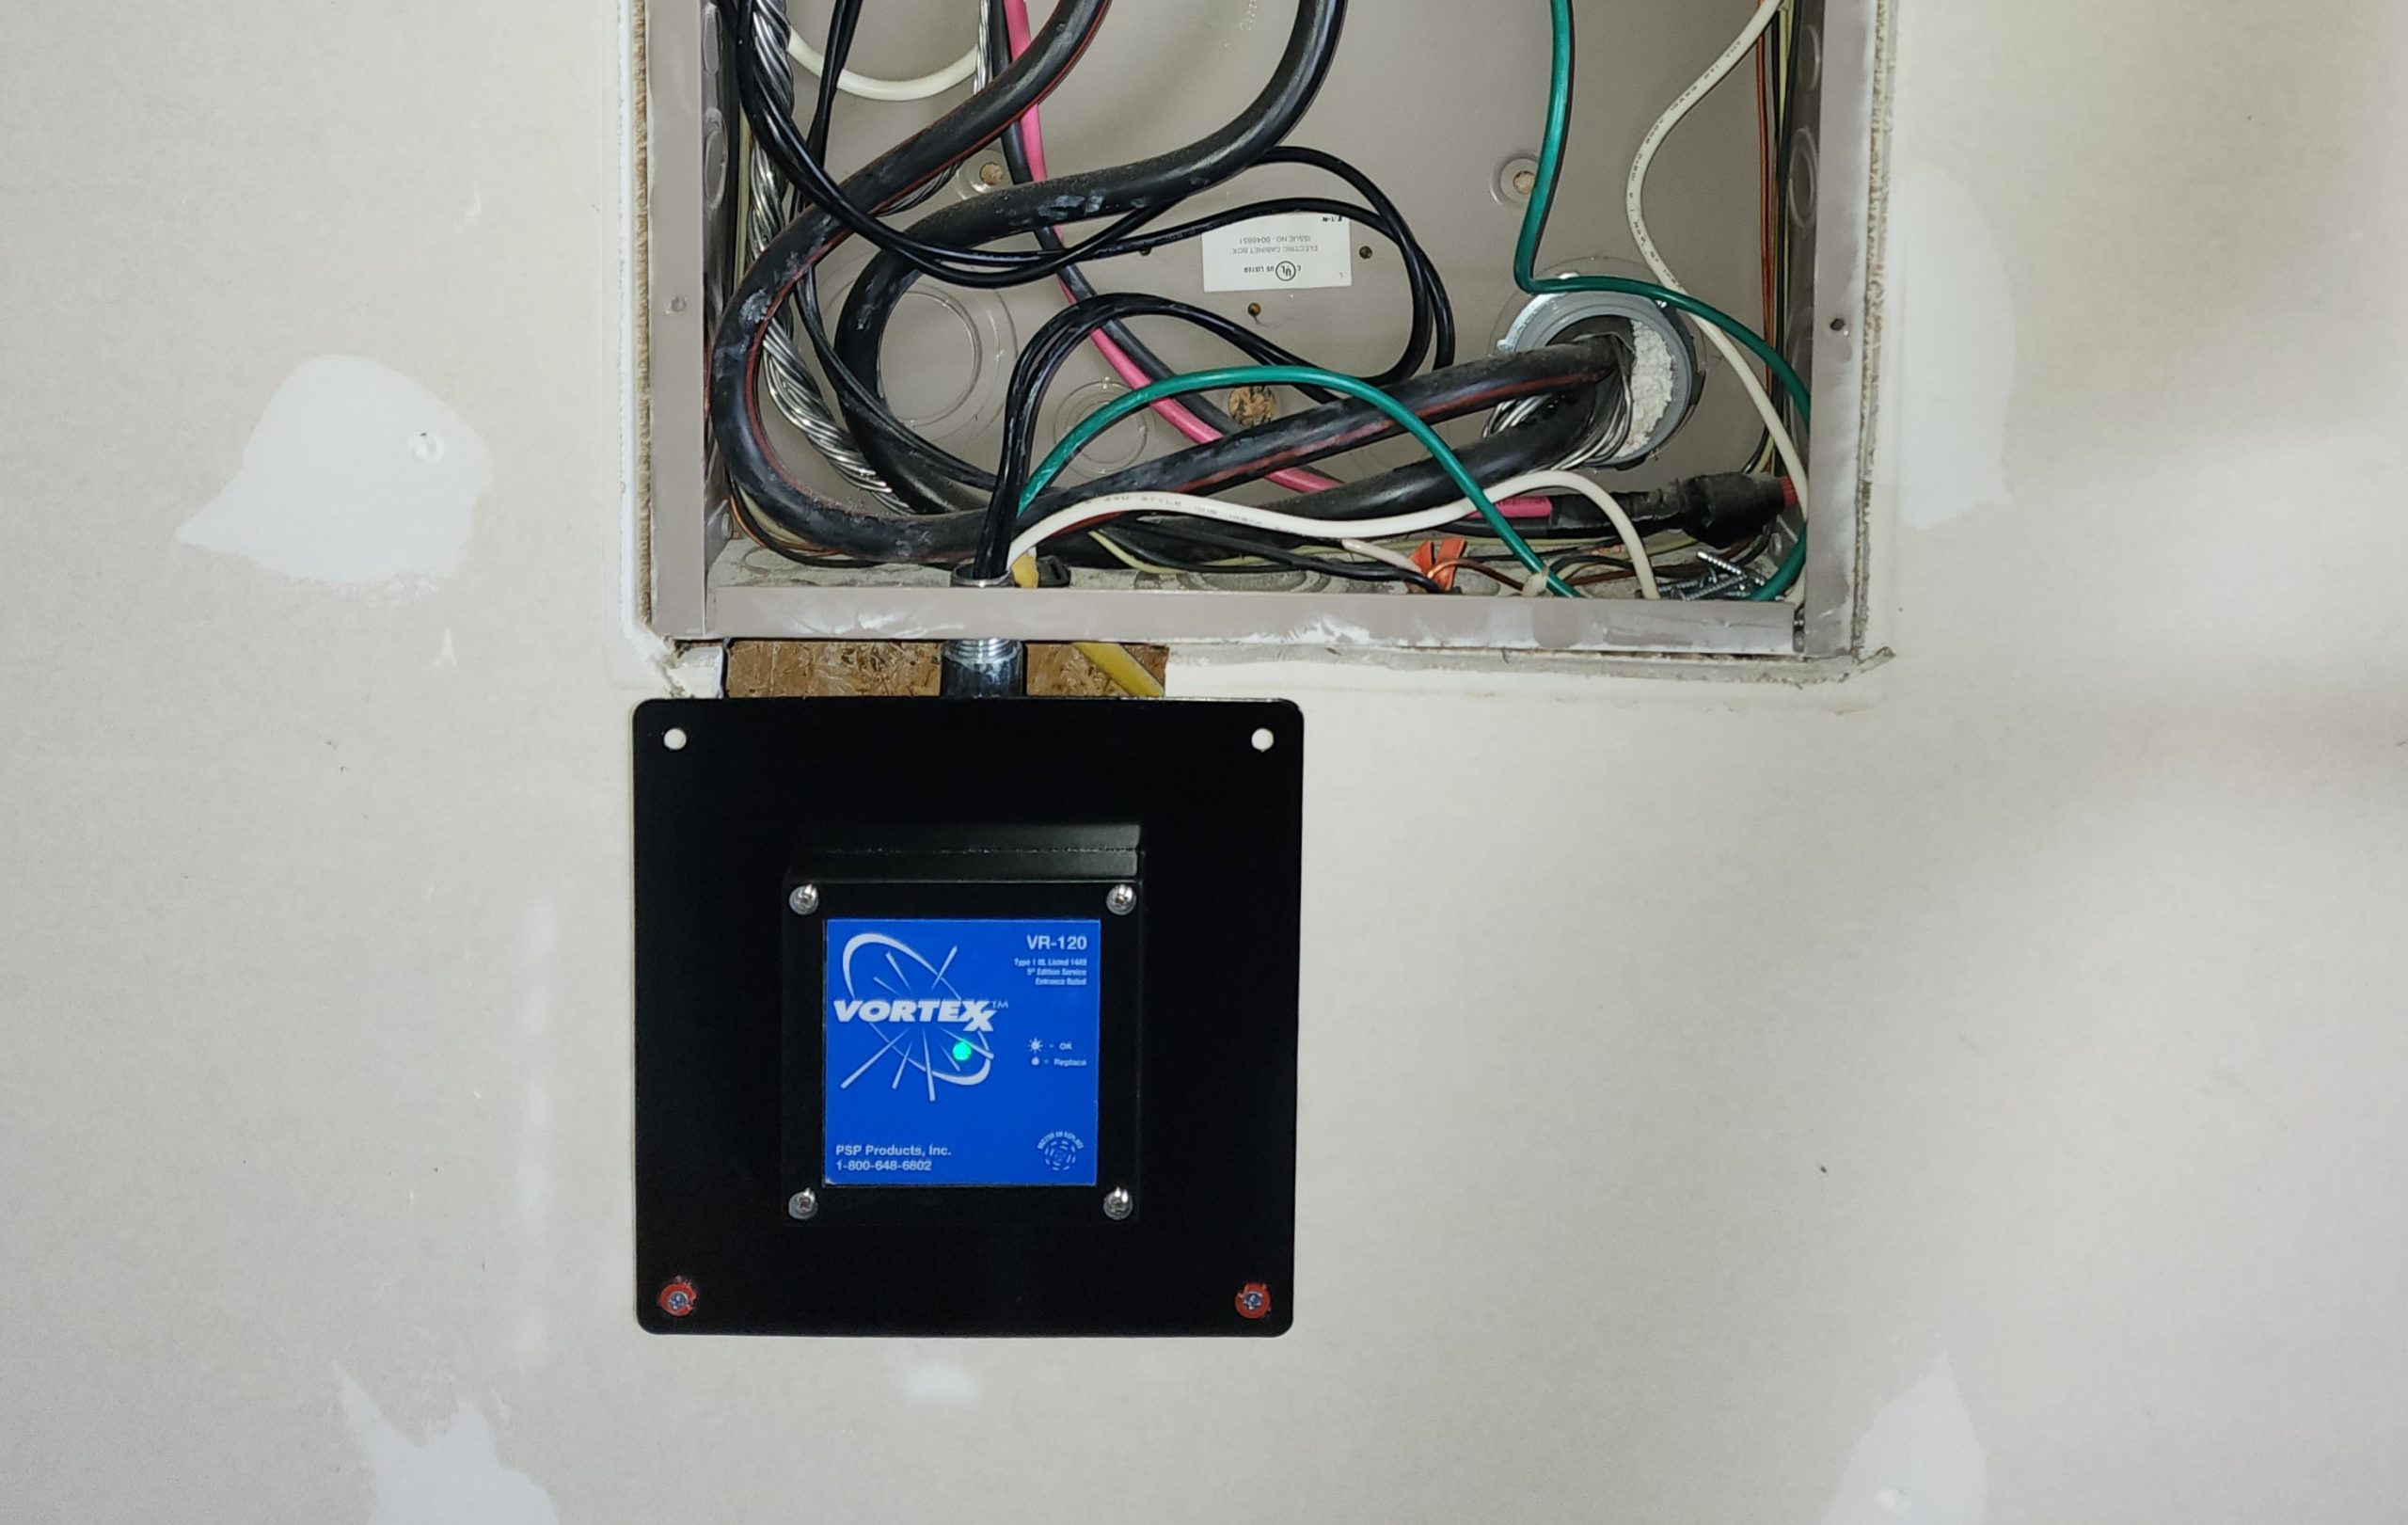 An open electrical box with wires and a mounted black digital control panel displaying "vortex" on its screen.